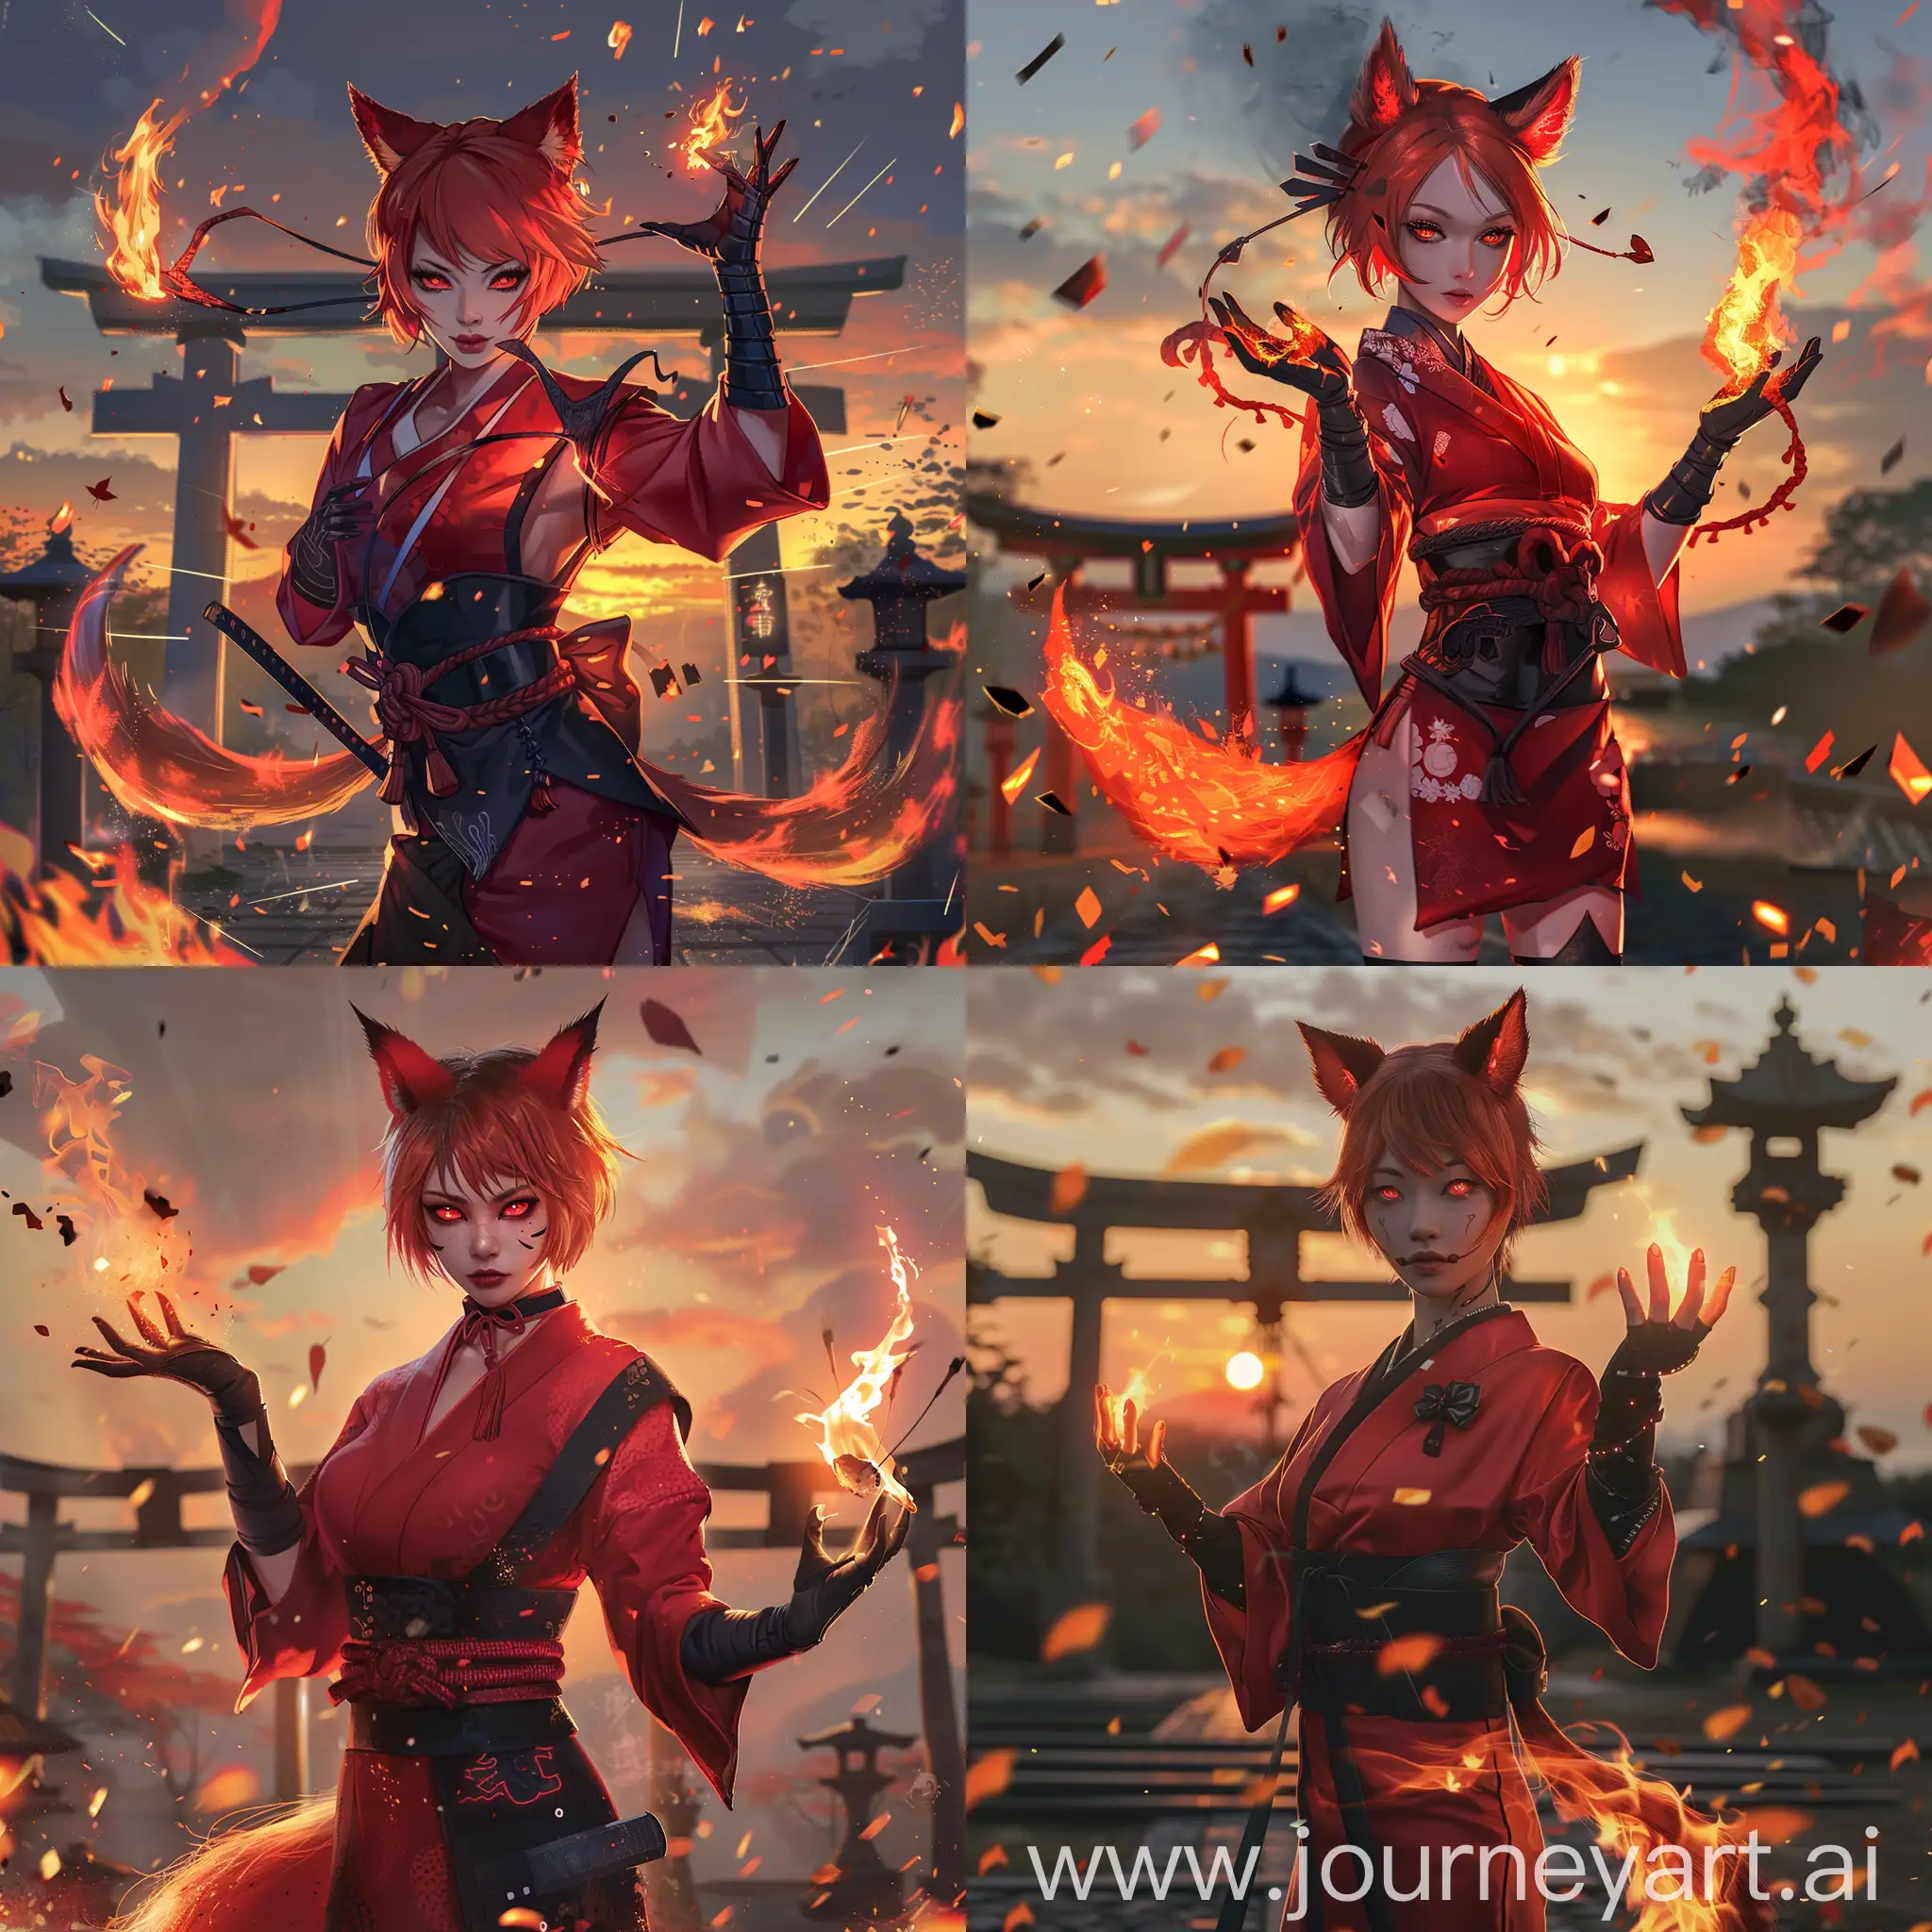 Fiery-RedHaired-Anime-Woman-Casting-Fire-Magic-at-Sunset